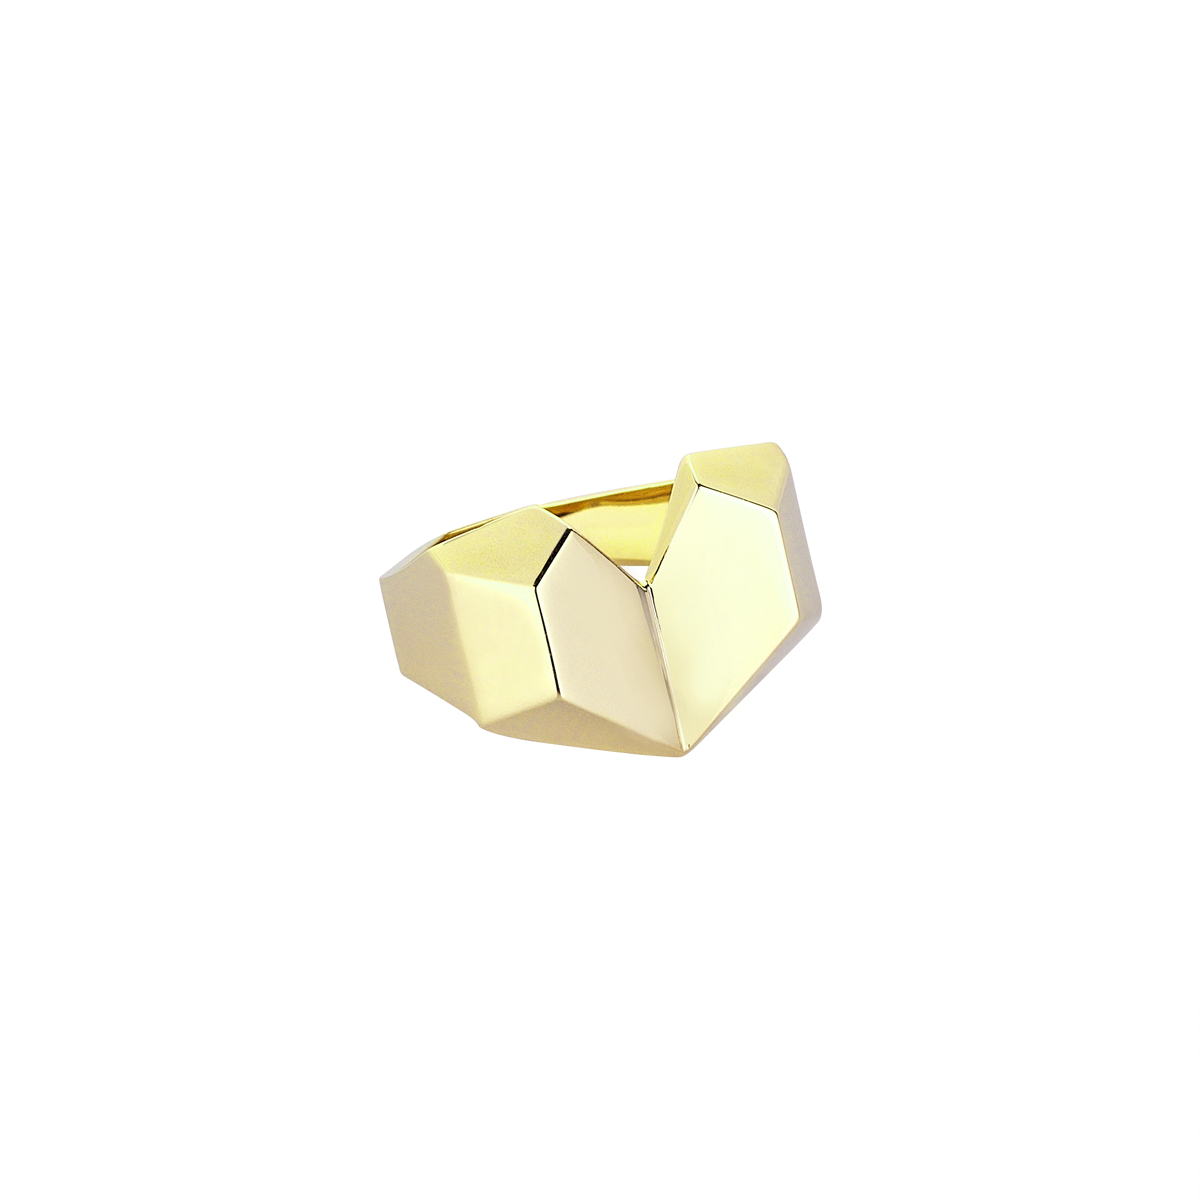 Origami Love Little Finger Ring in Yellow Gold - Her Story Shop